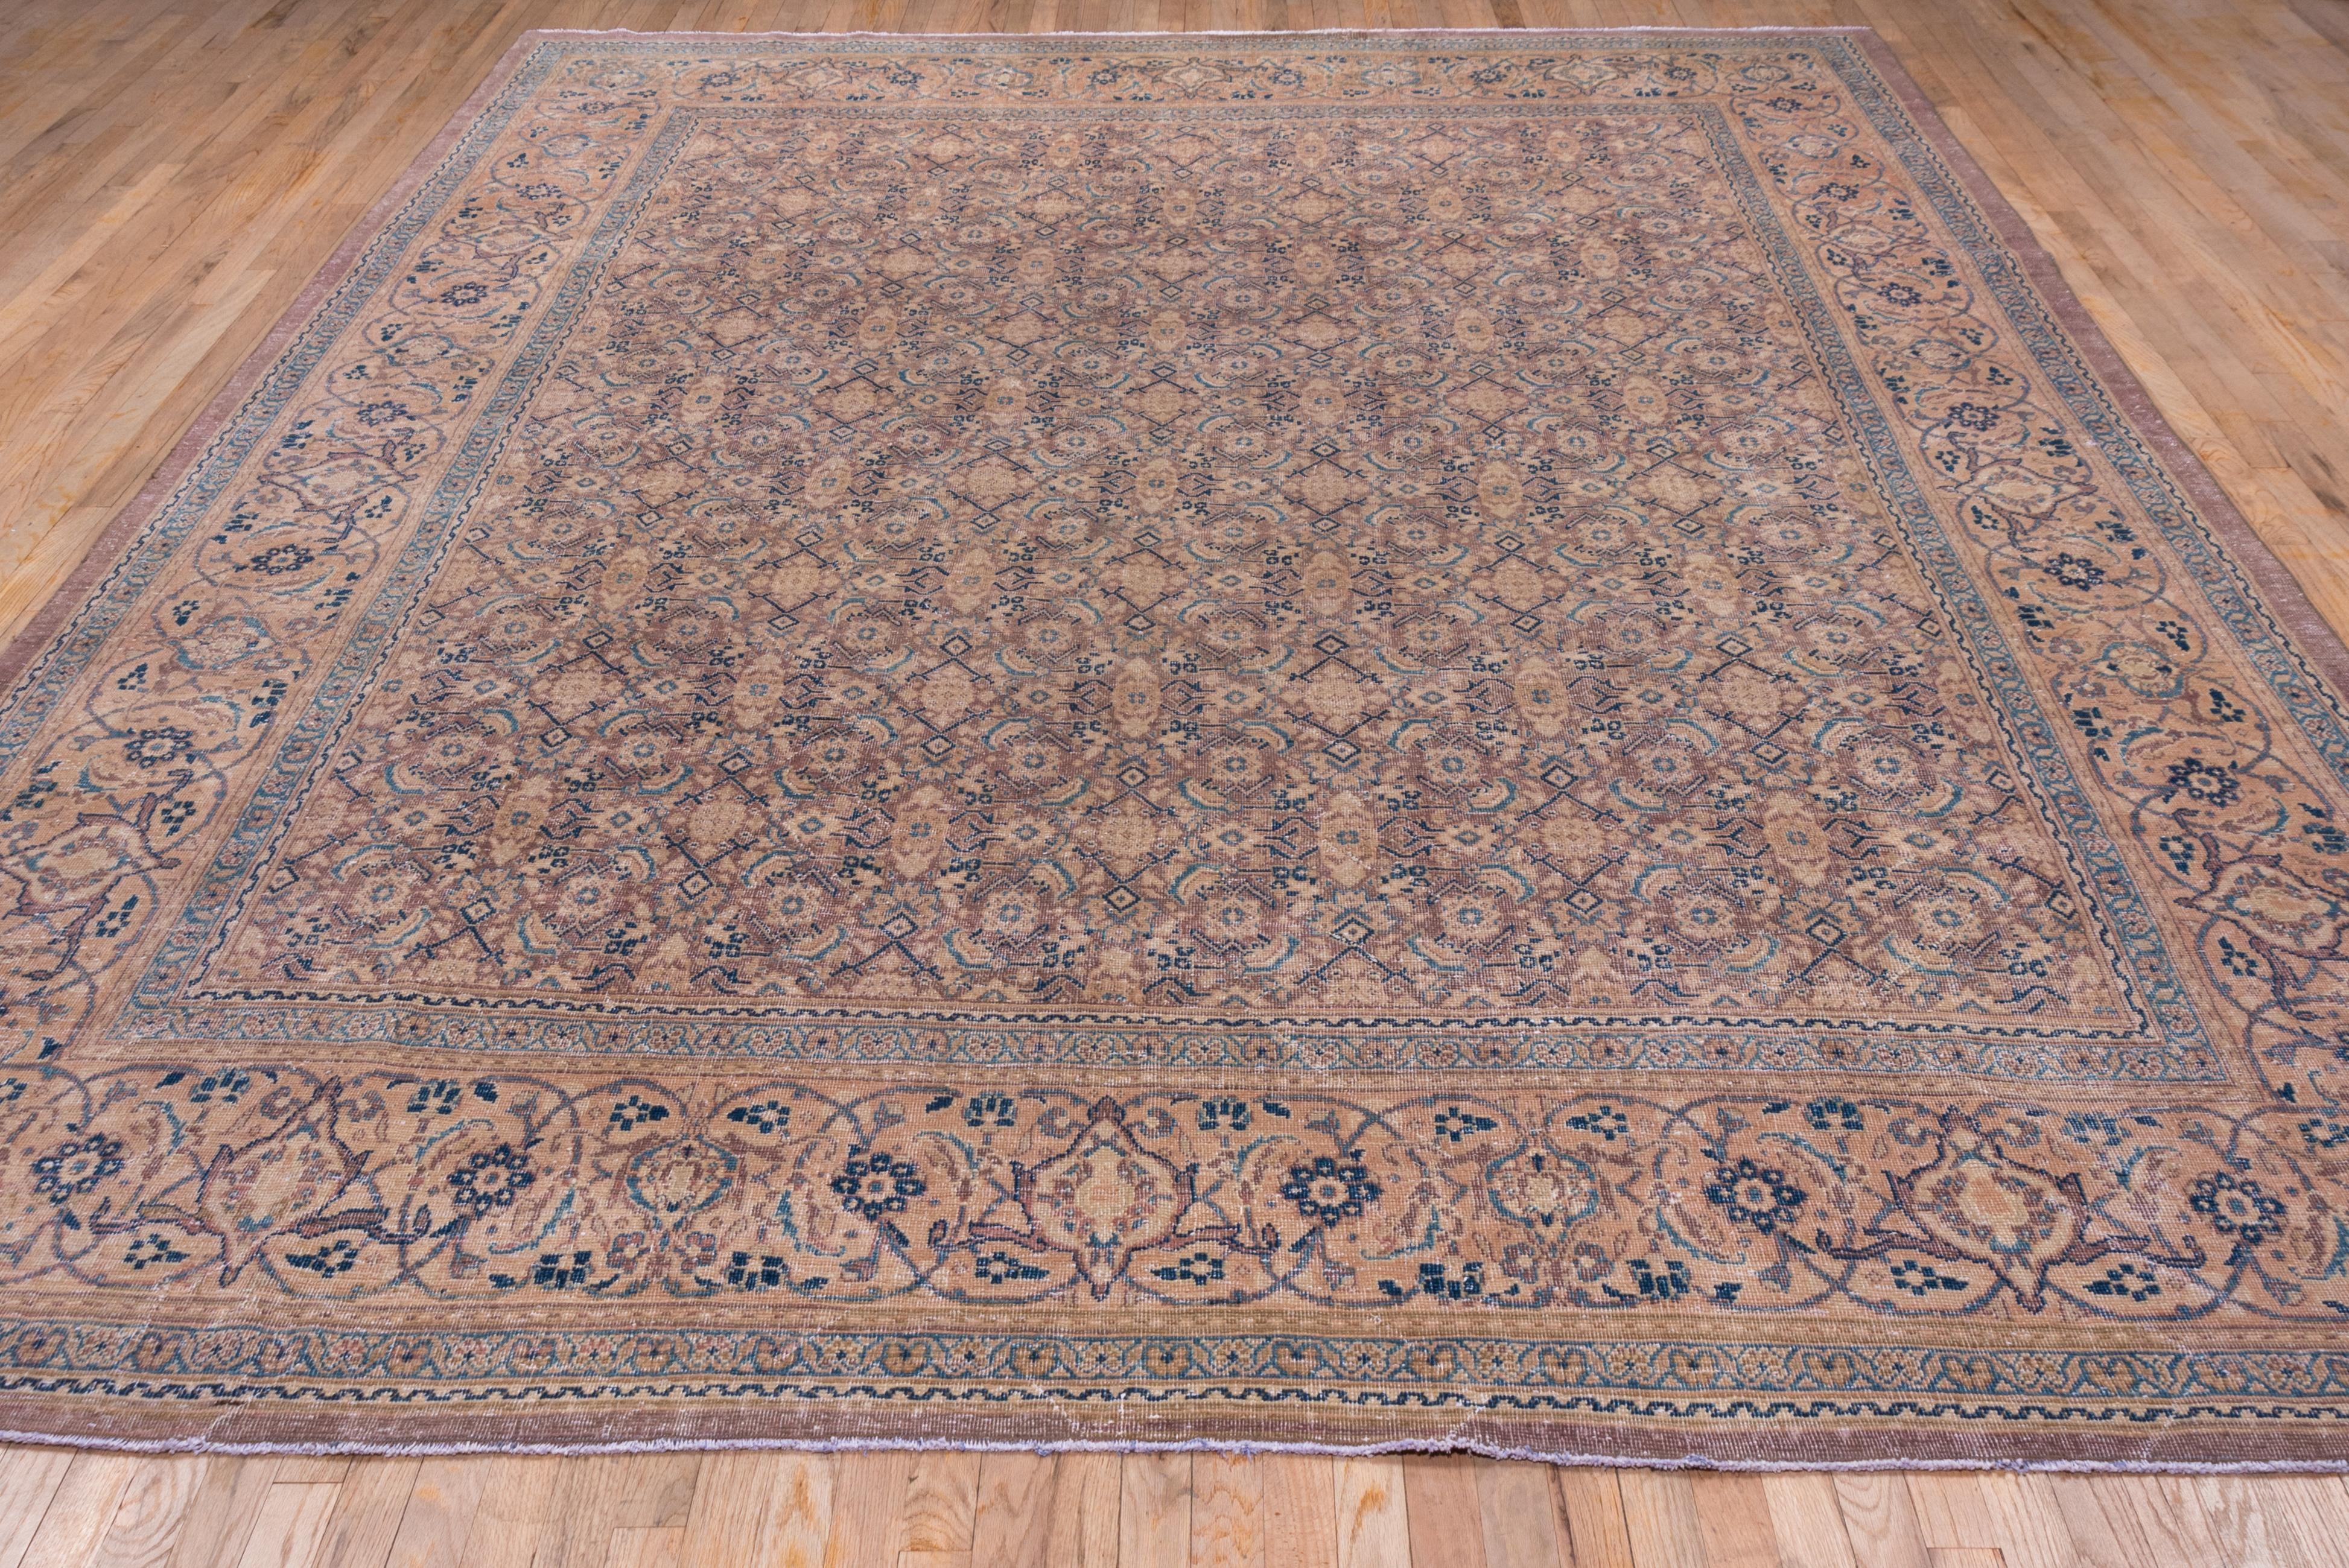 Tribal Eliko Rugs by David Ariel Antique Persian Mahal Rug, Purple Allover Field For Sale